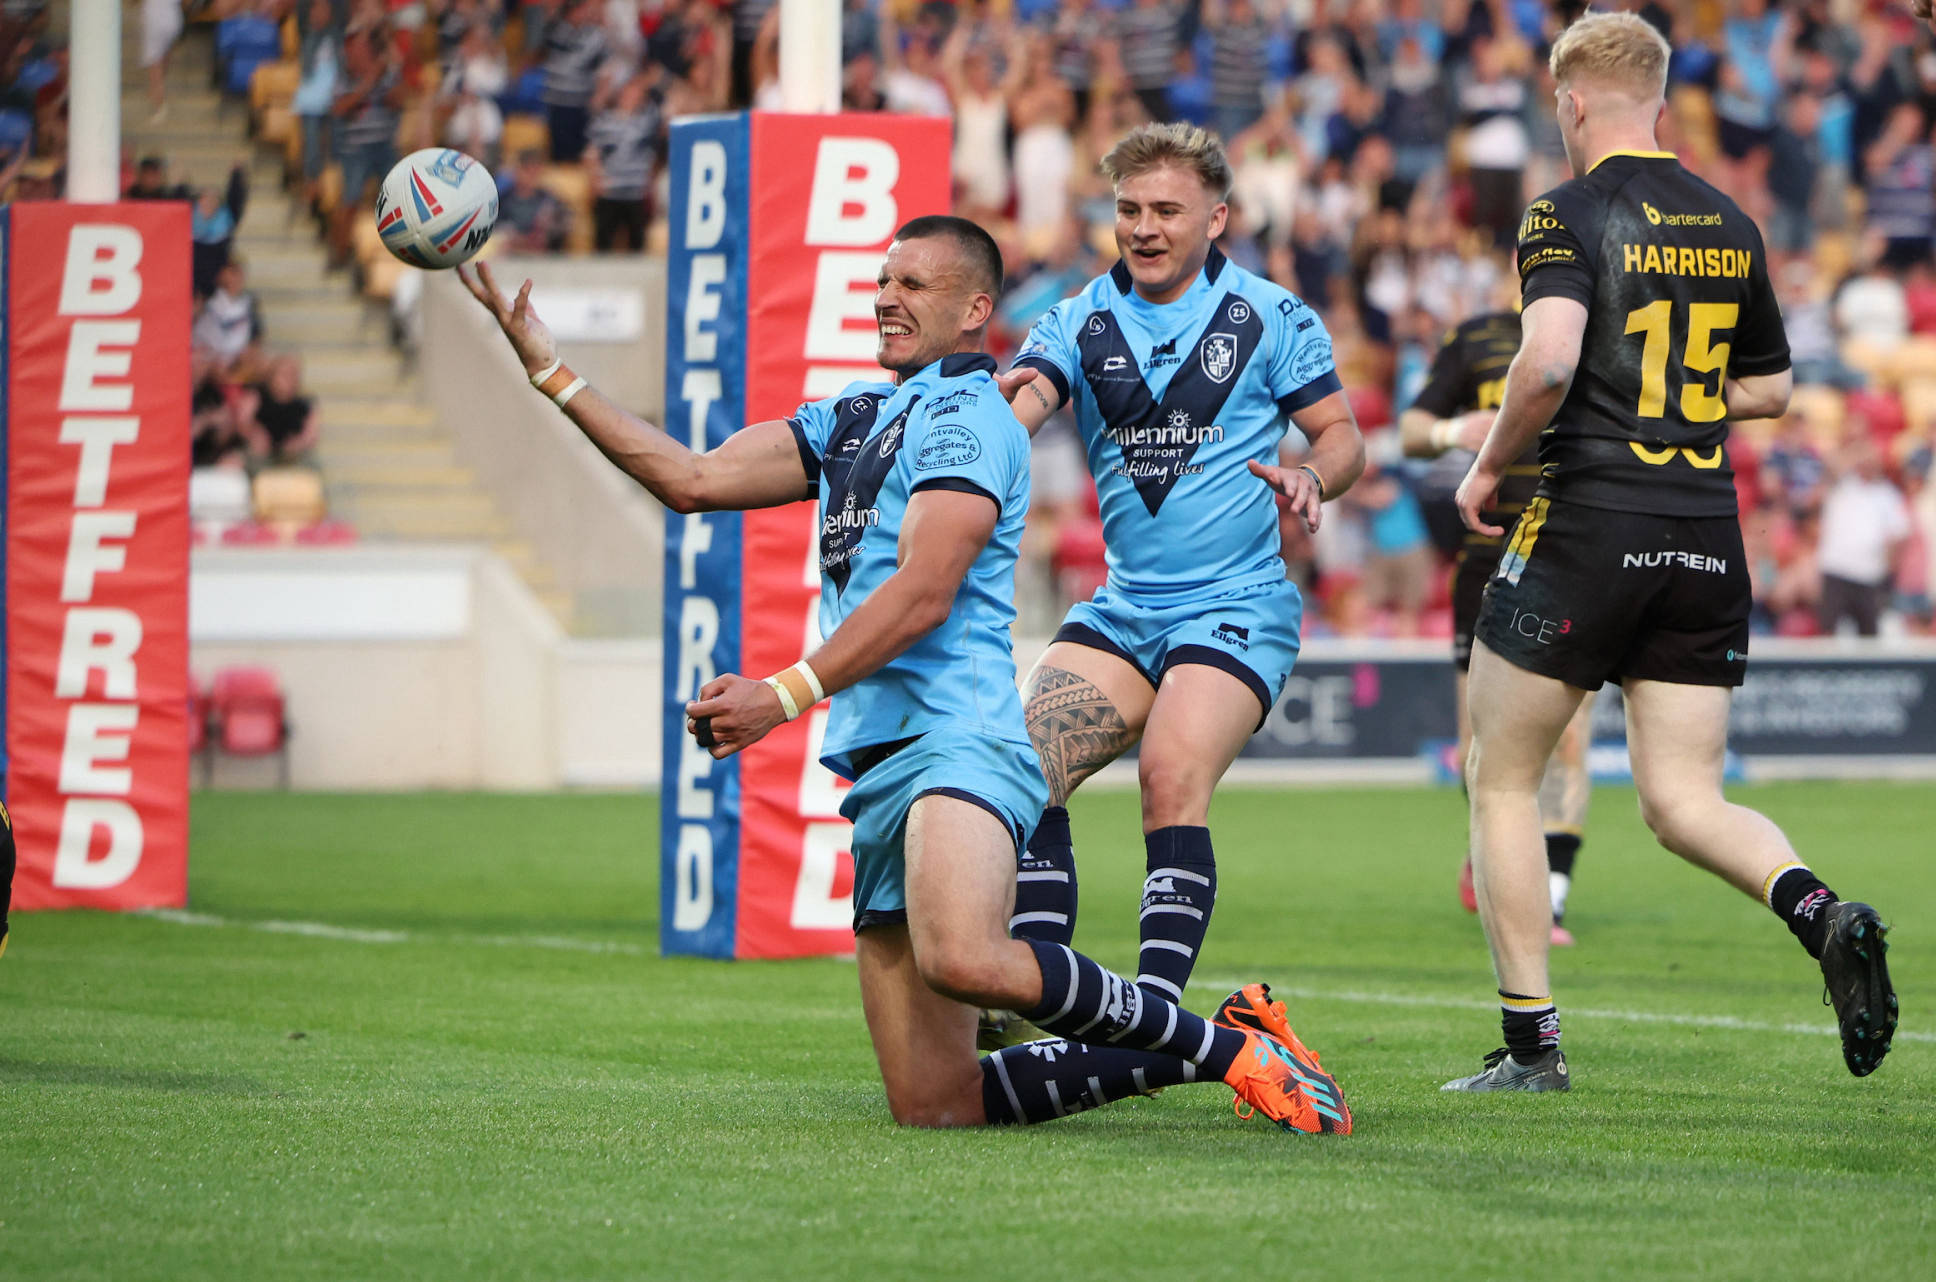 Betfred Championship Preview | Round 13